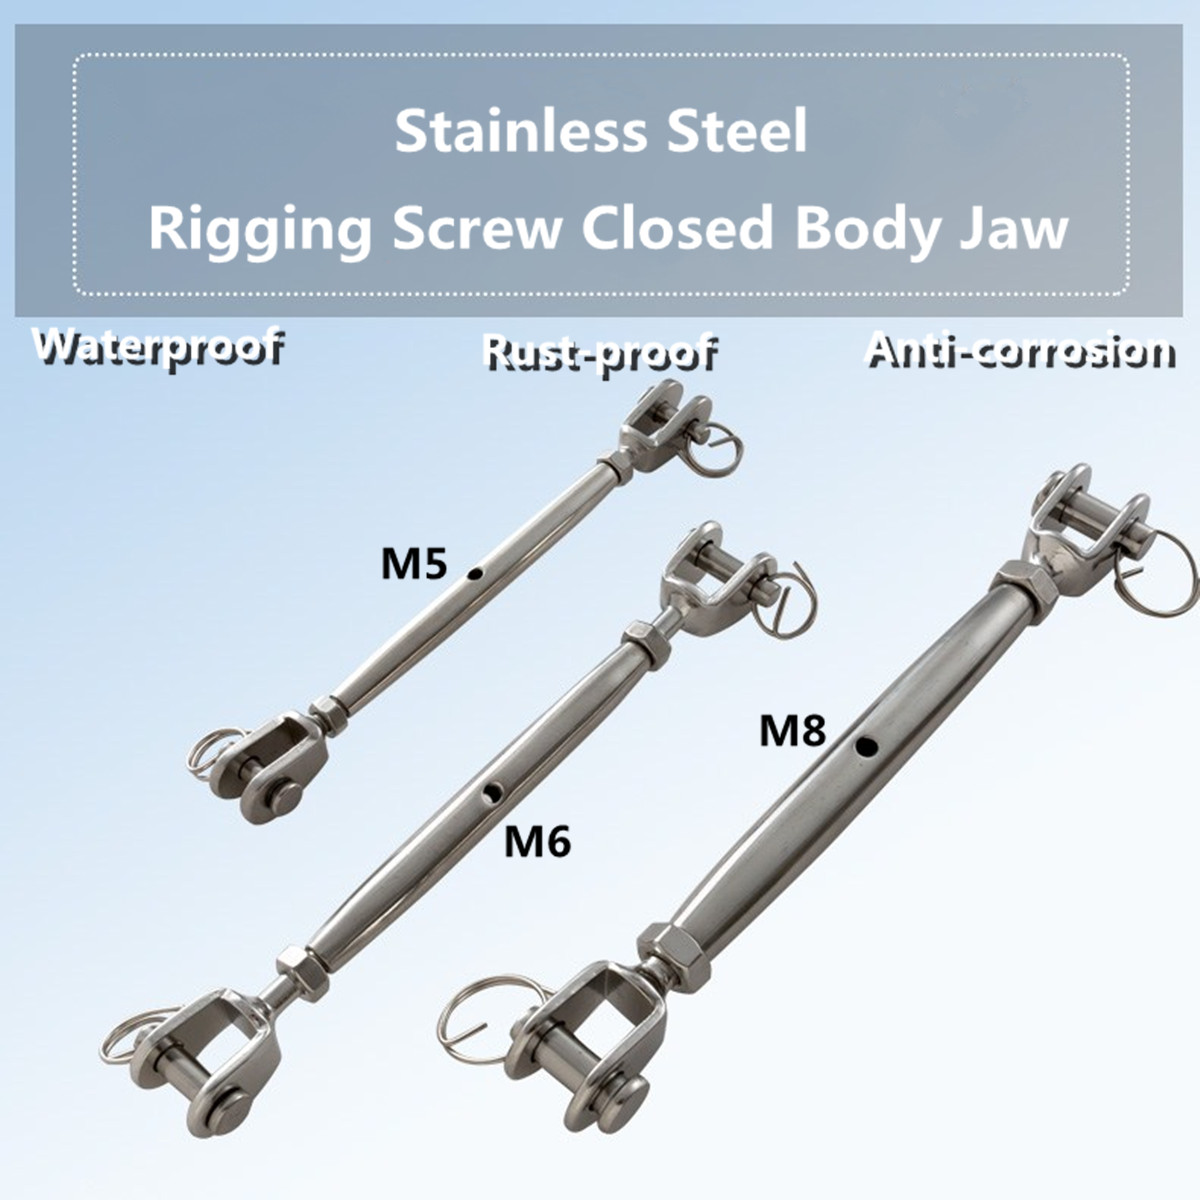 M5-M6-M8-Jaw-amp-Jaw-Turnbuckle-316-Stainless-Steel-Closed-Body-Rigging-Screw-for-Marine-Boat-Yacht-1180221